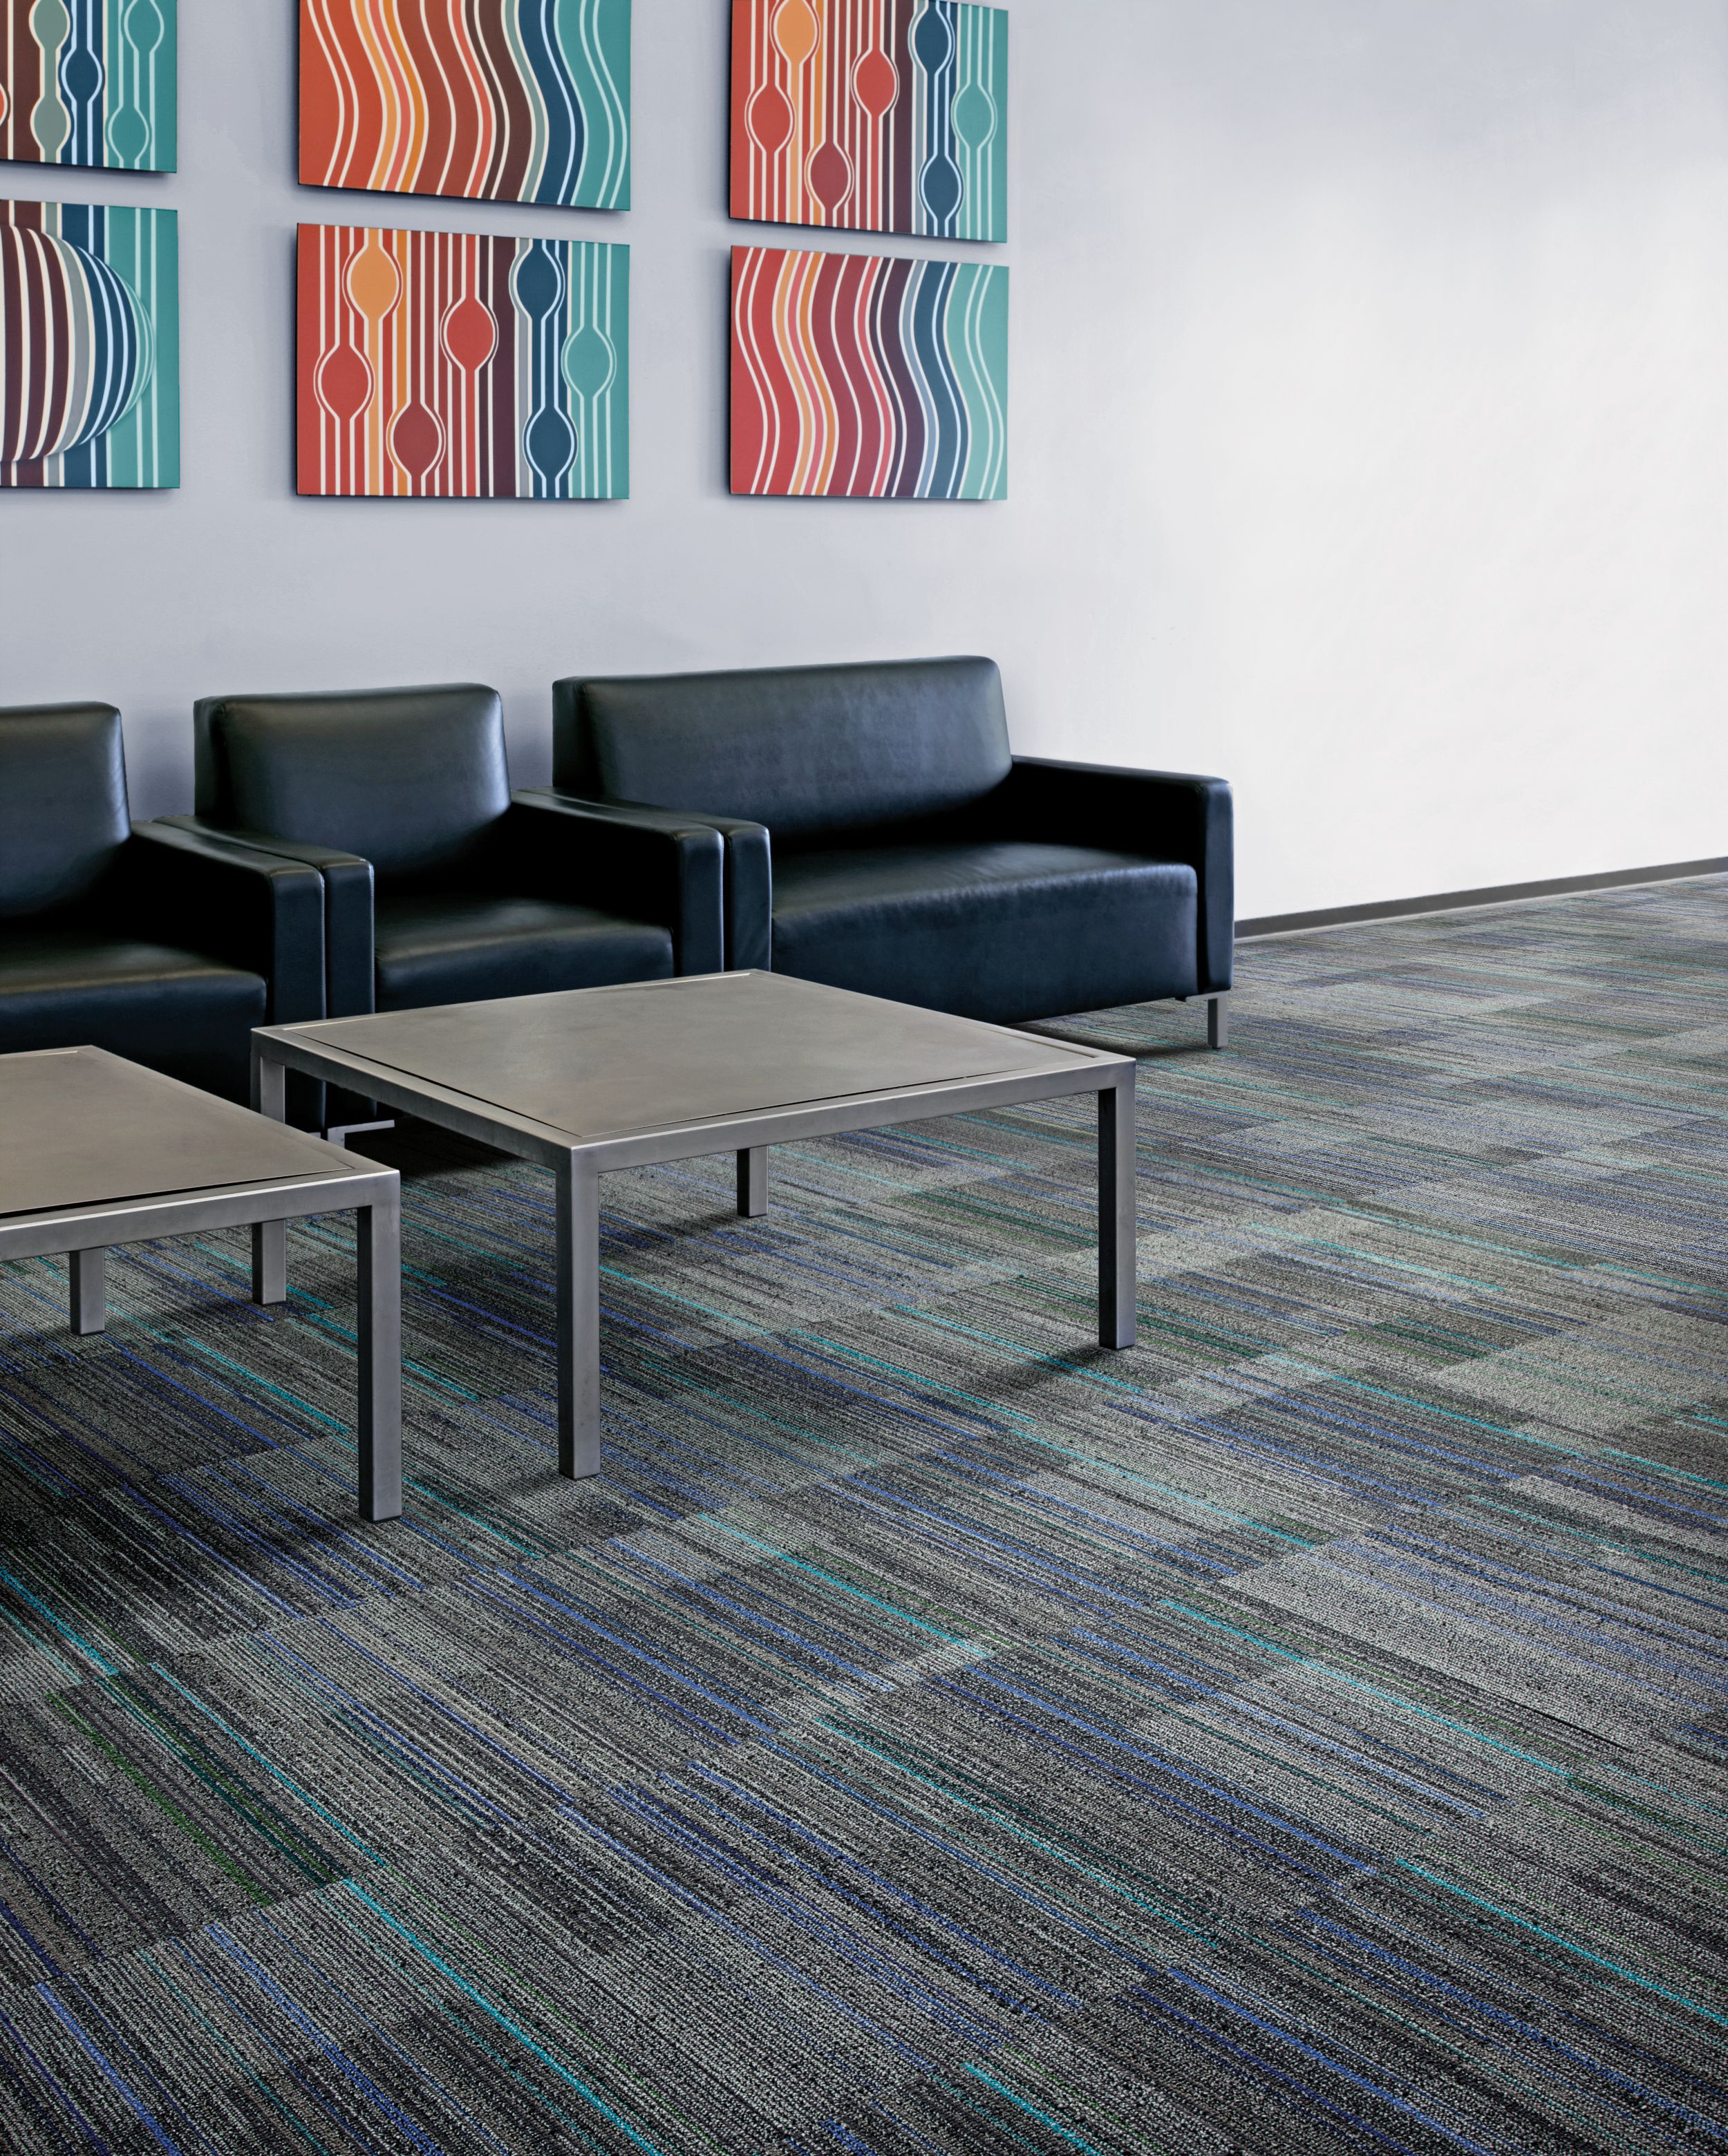 Interface Straight Edge carpet tile in waiting area with table and chairs numéro d’image 5